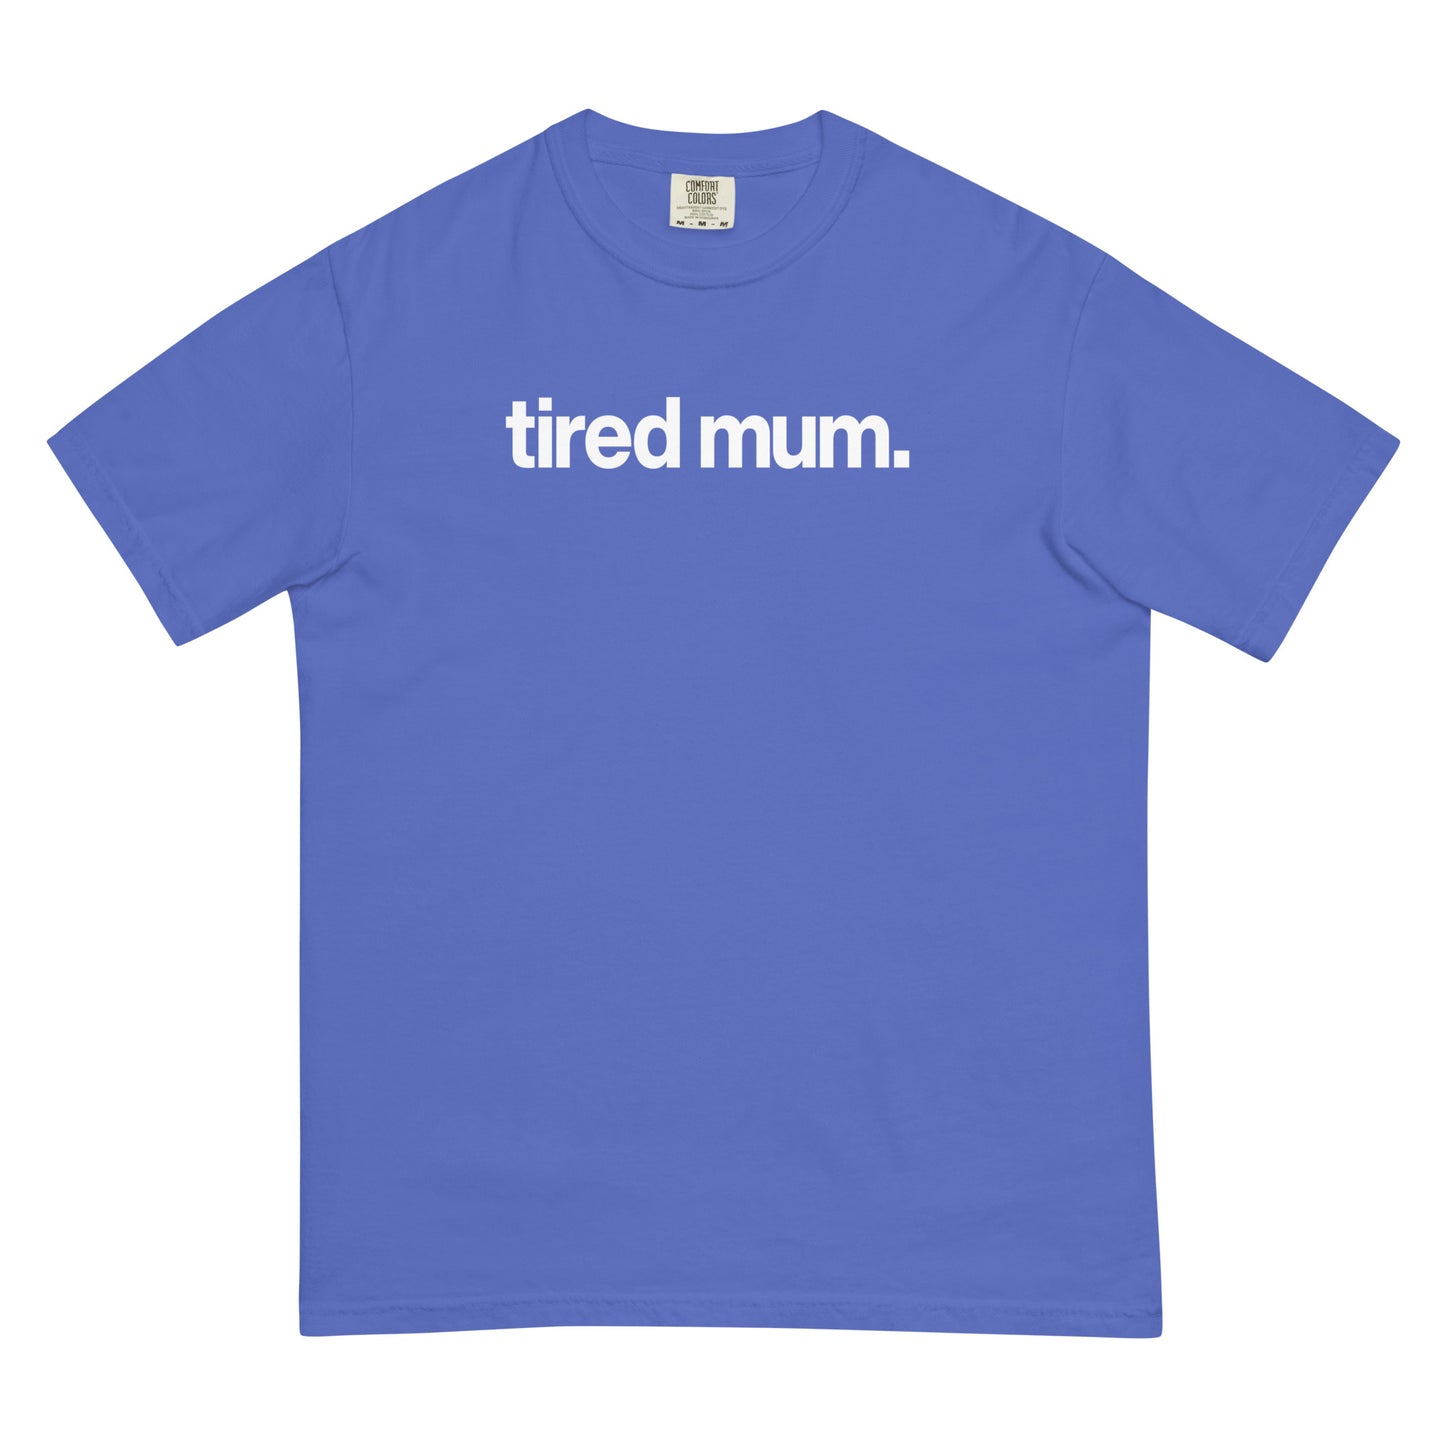 "tired mum" relaxed fit t-shirt